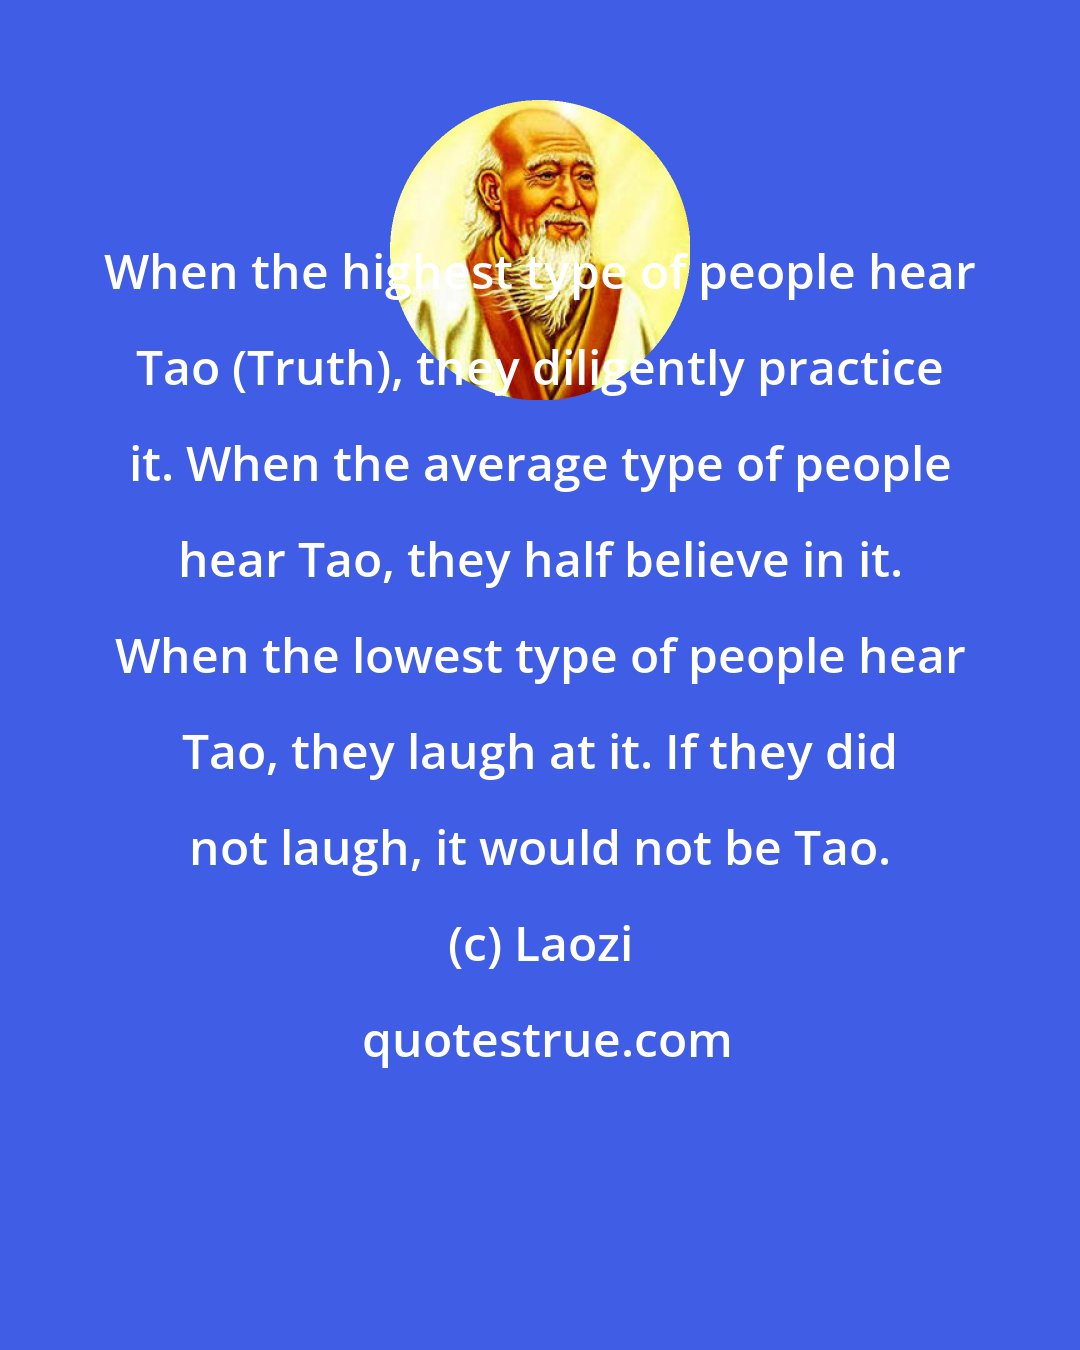 Laozi: When the highest type of people hear Tao (Truth), they diligently practice it. When the average type of people hear Tao, they half believe in it. When the lowest type of people hear Tao, they laugh at it. If they did not laugh, it would not be Tao.